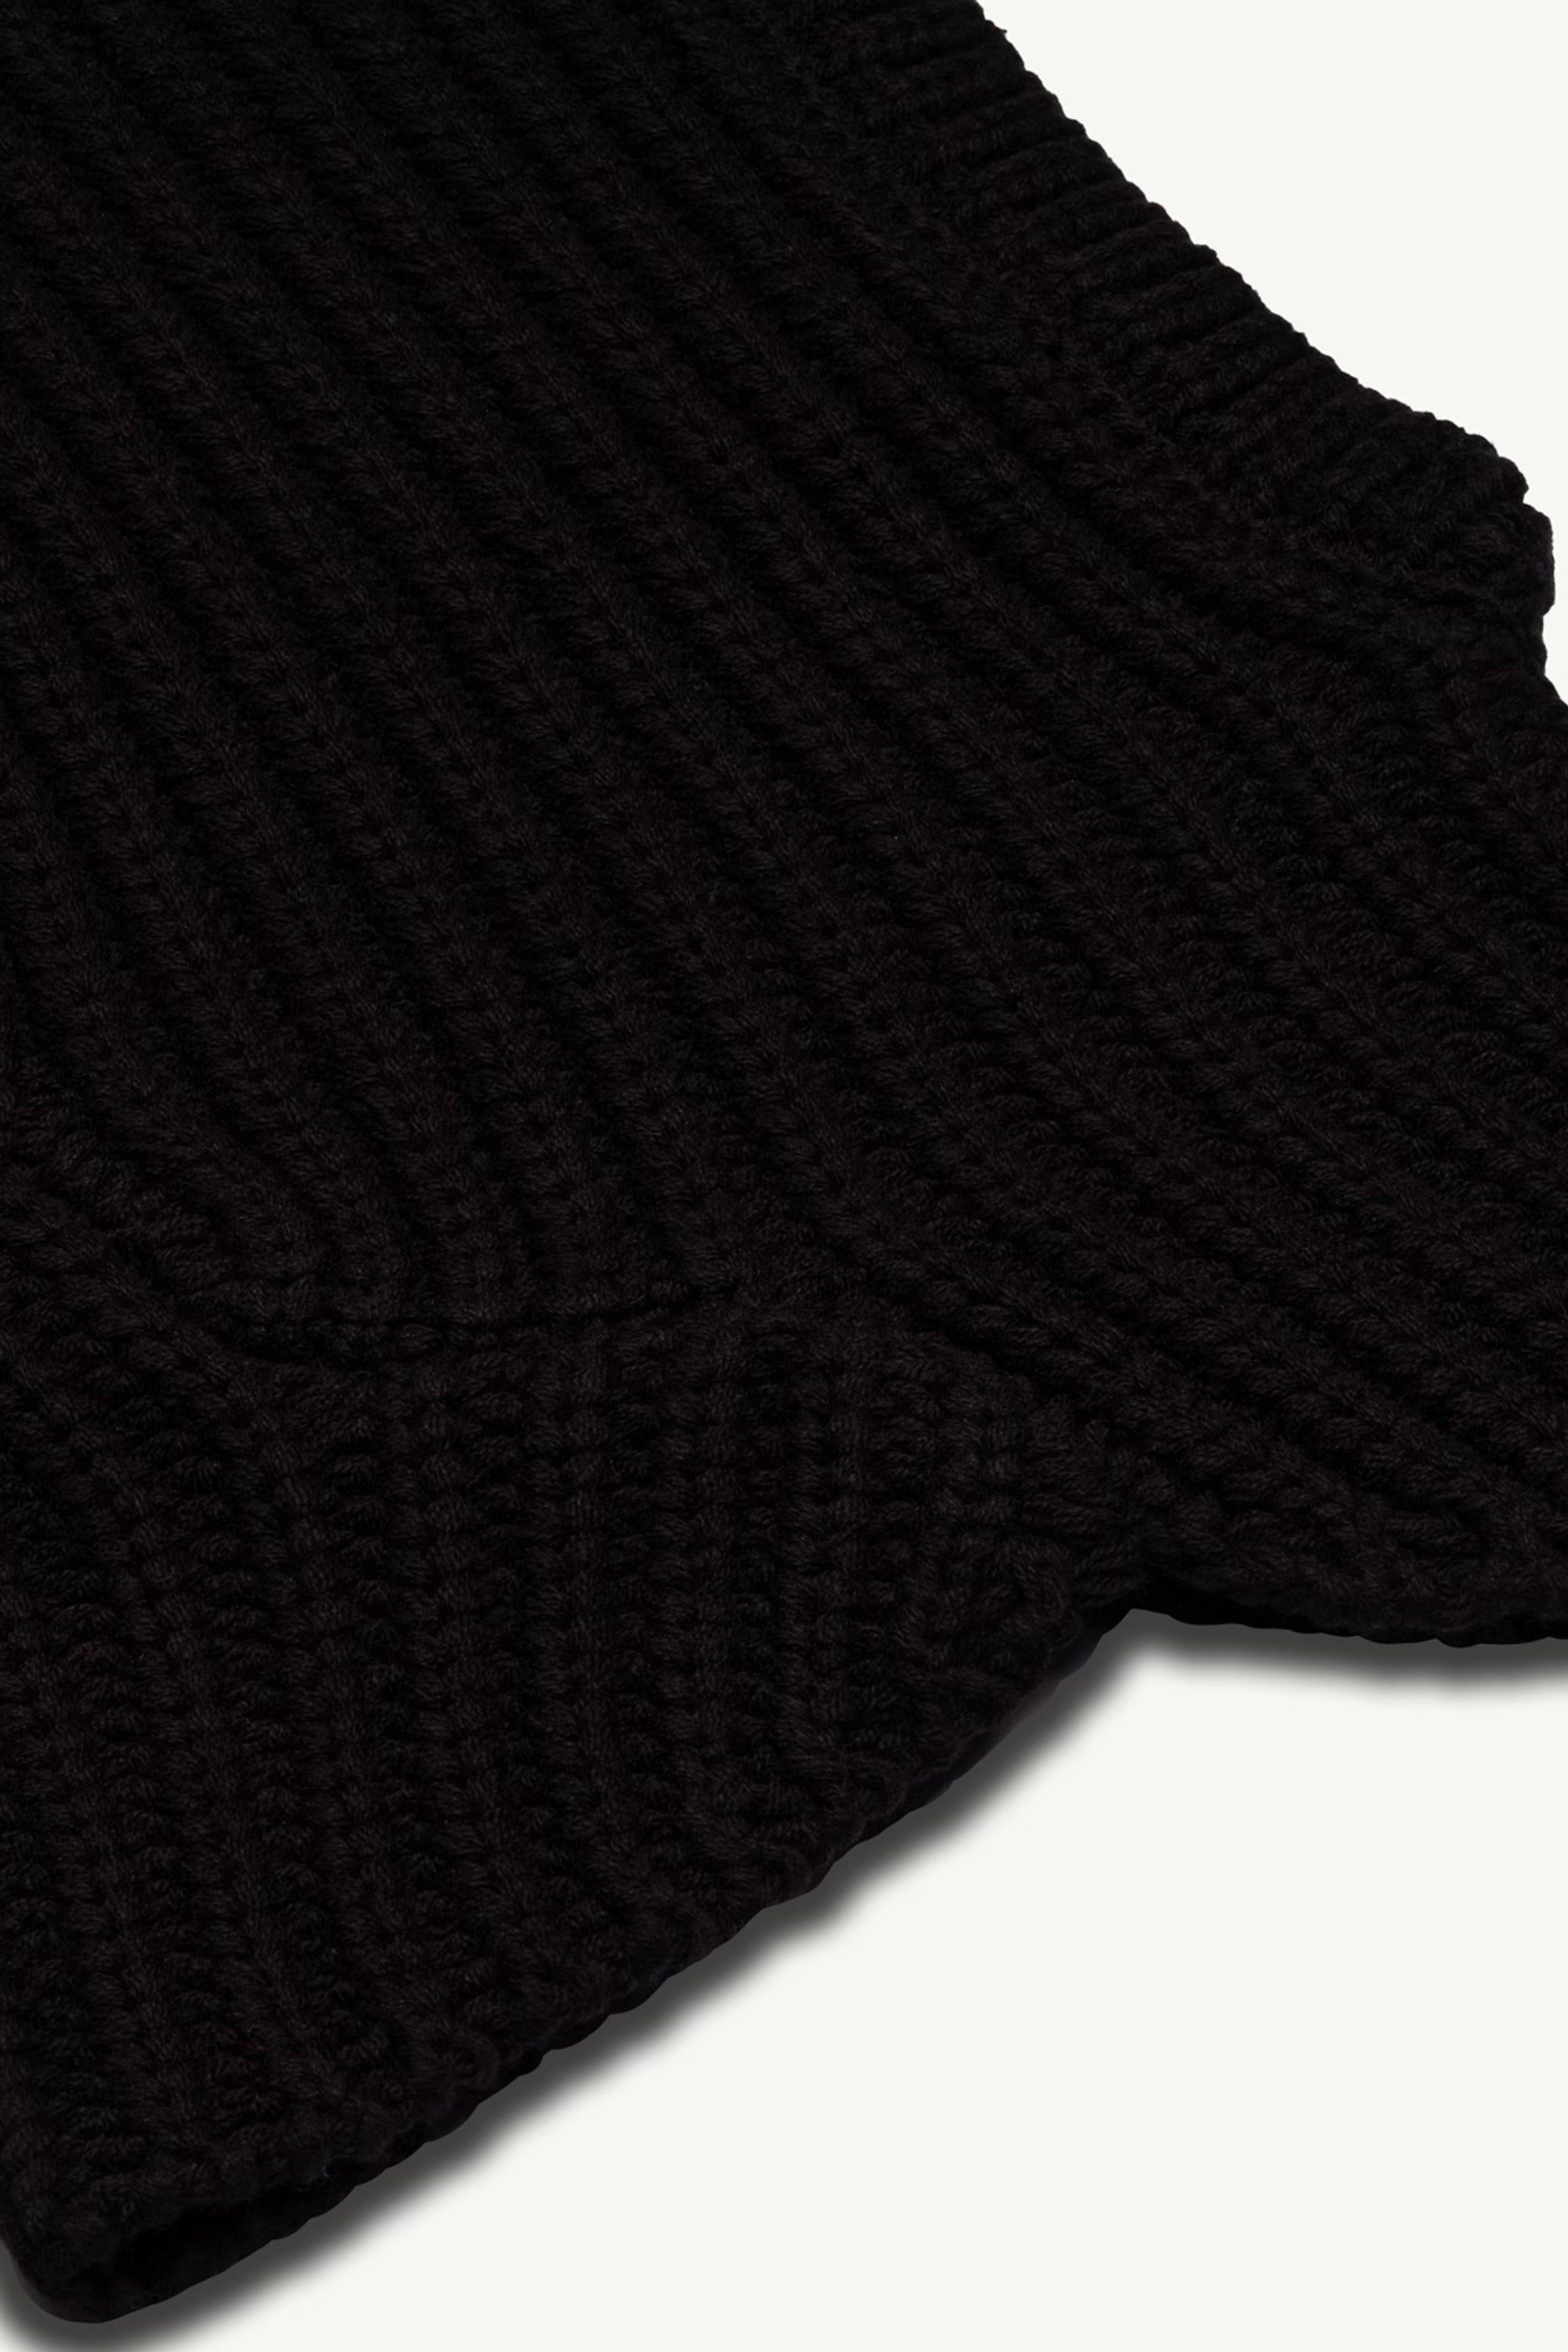 Cable Knit Balaclava - Black Accessories Veiled Collection 